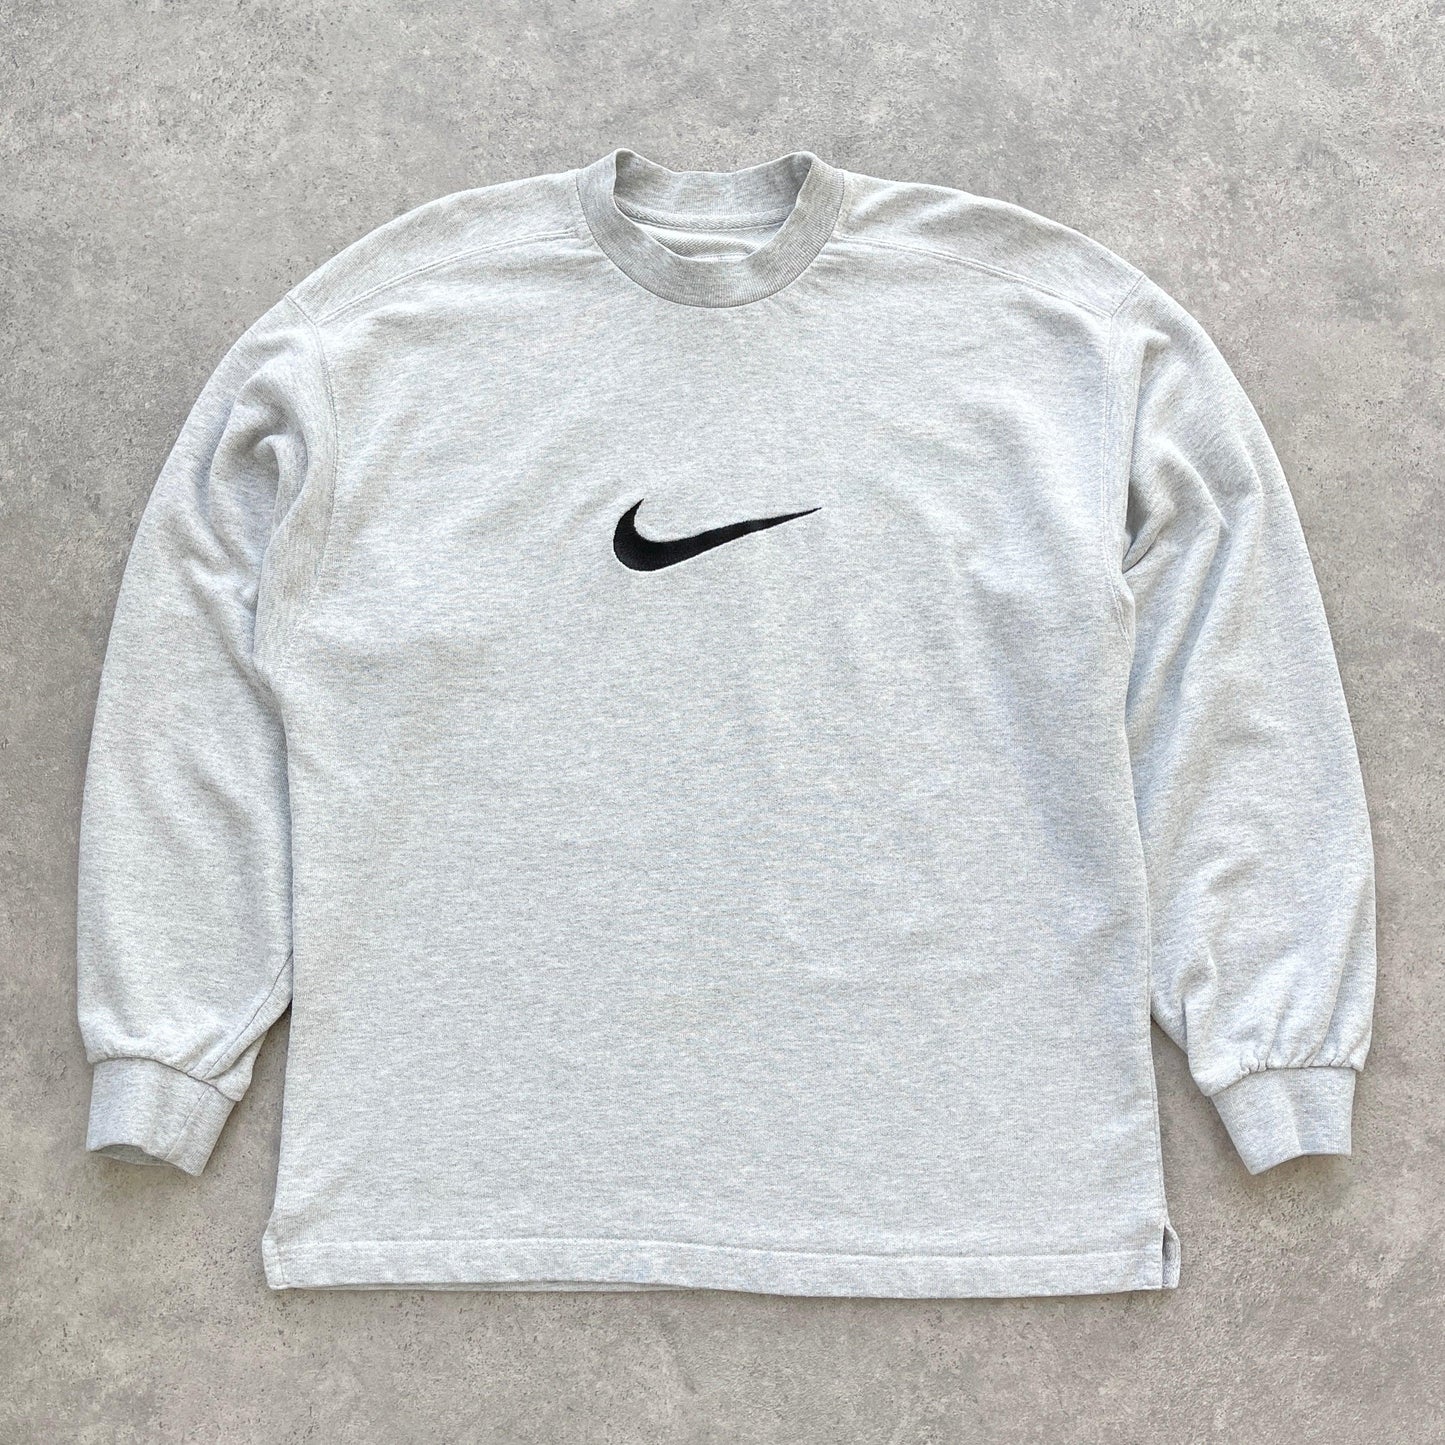 Nike 1990s embroidered heavyweight sweatshirt (M) - Known Source